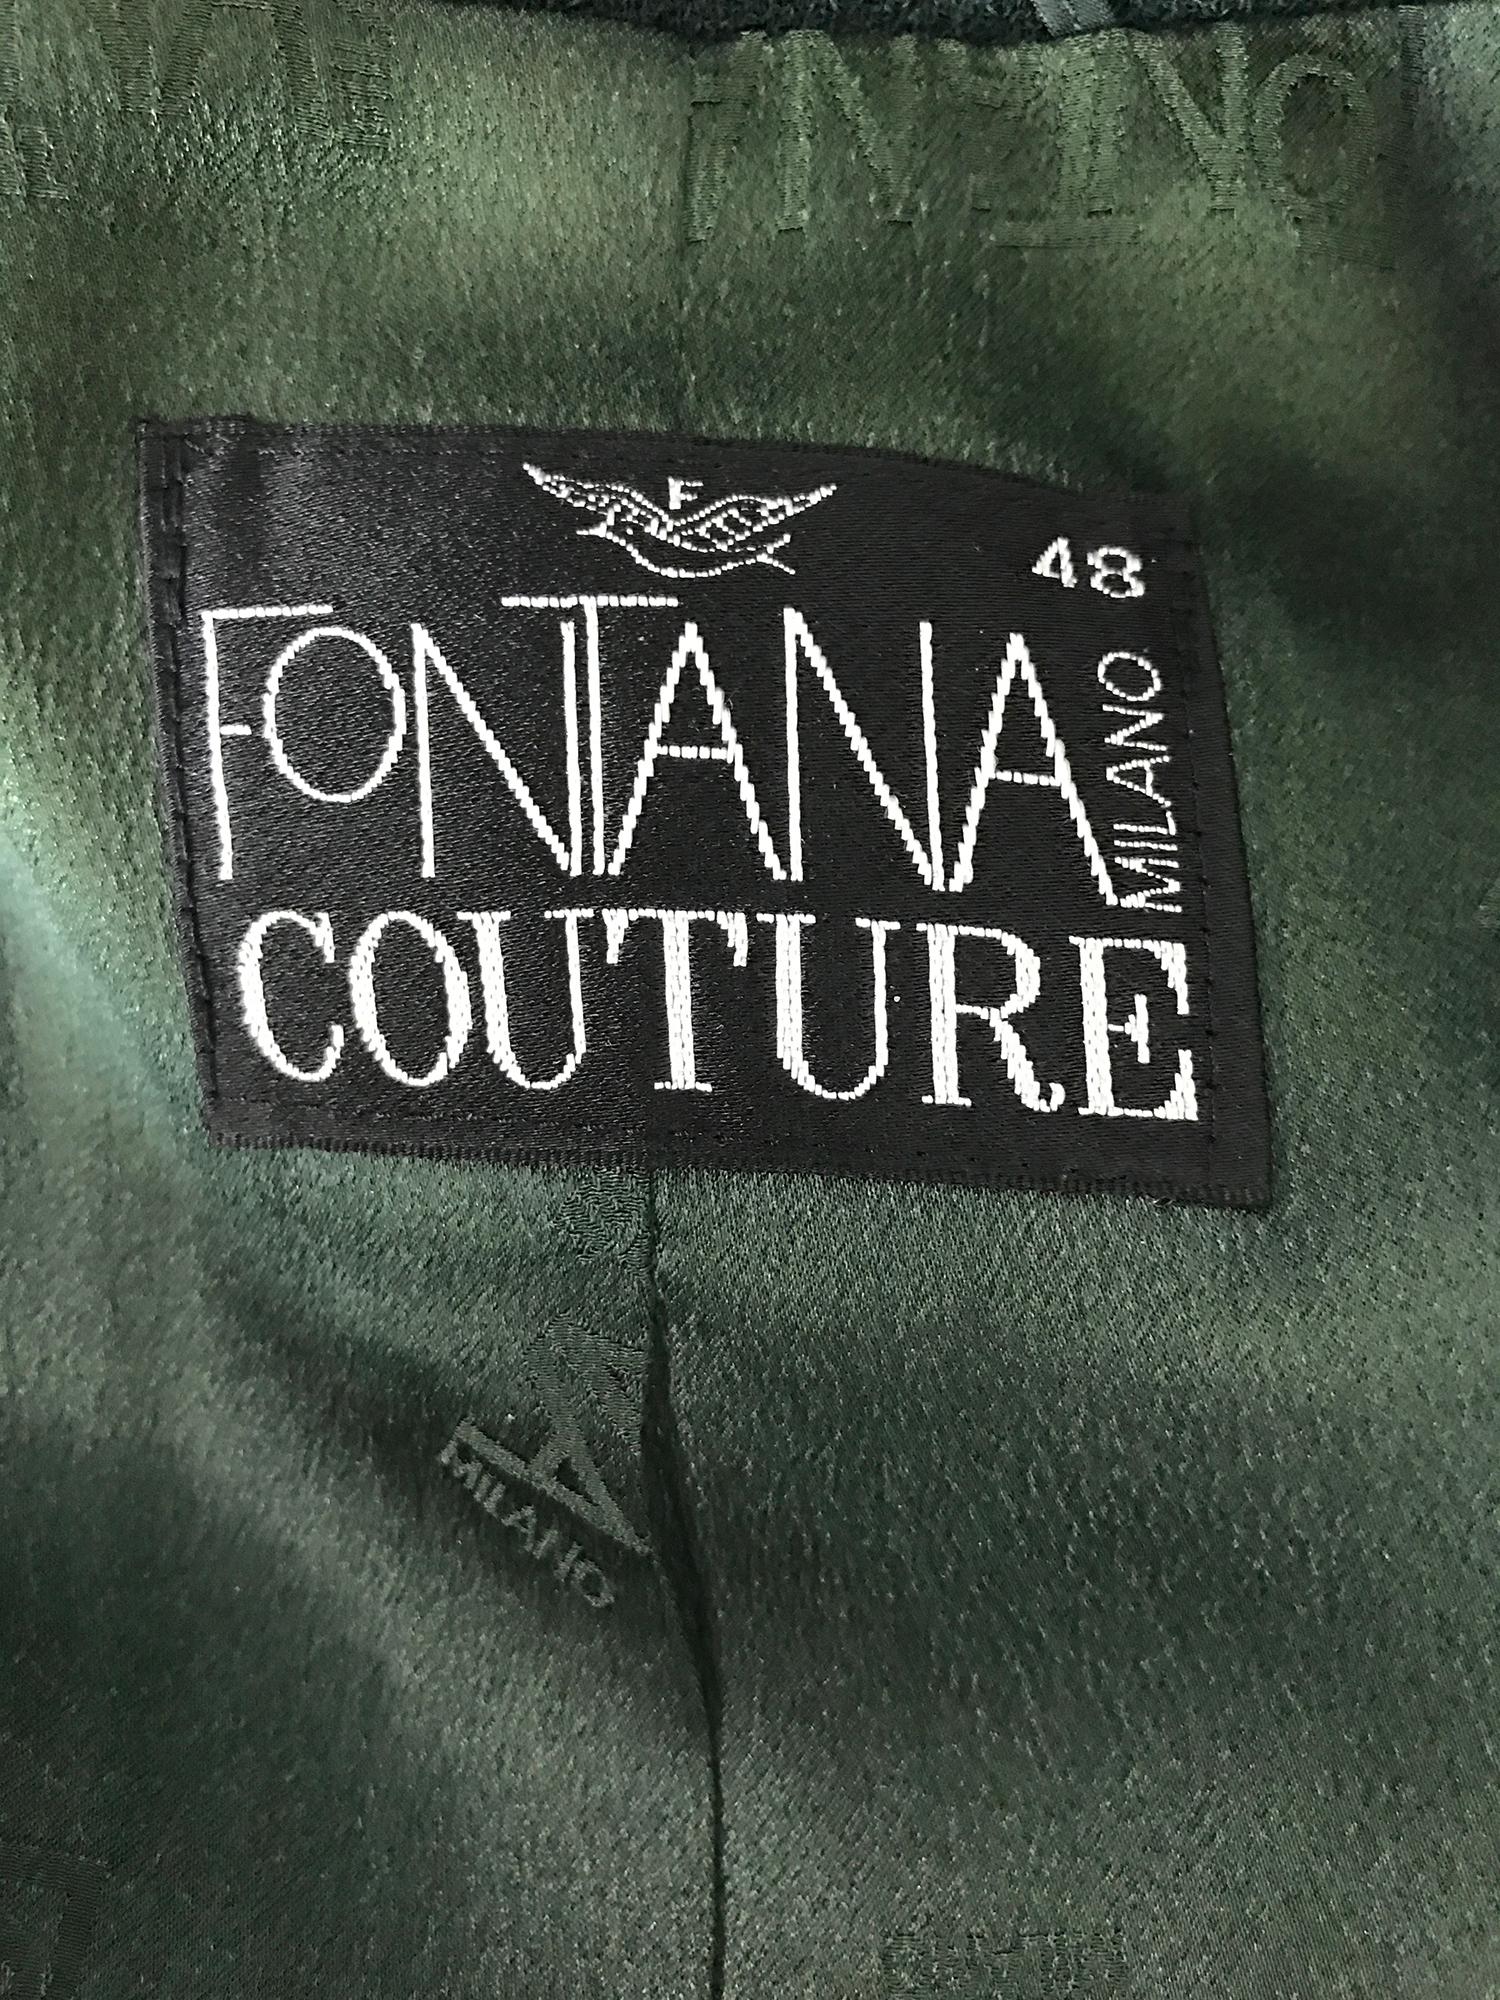 Fontana Couture Milano Dark Forest Green Zipper Front Jacket 48 7